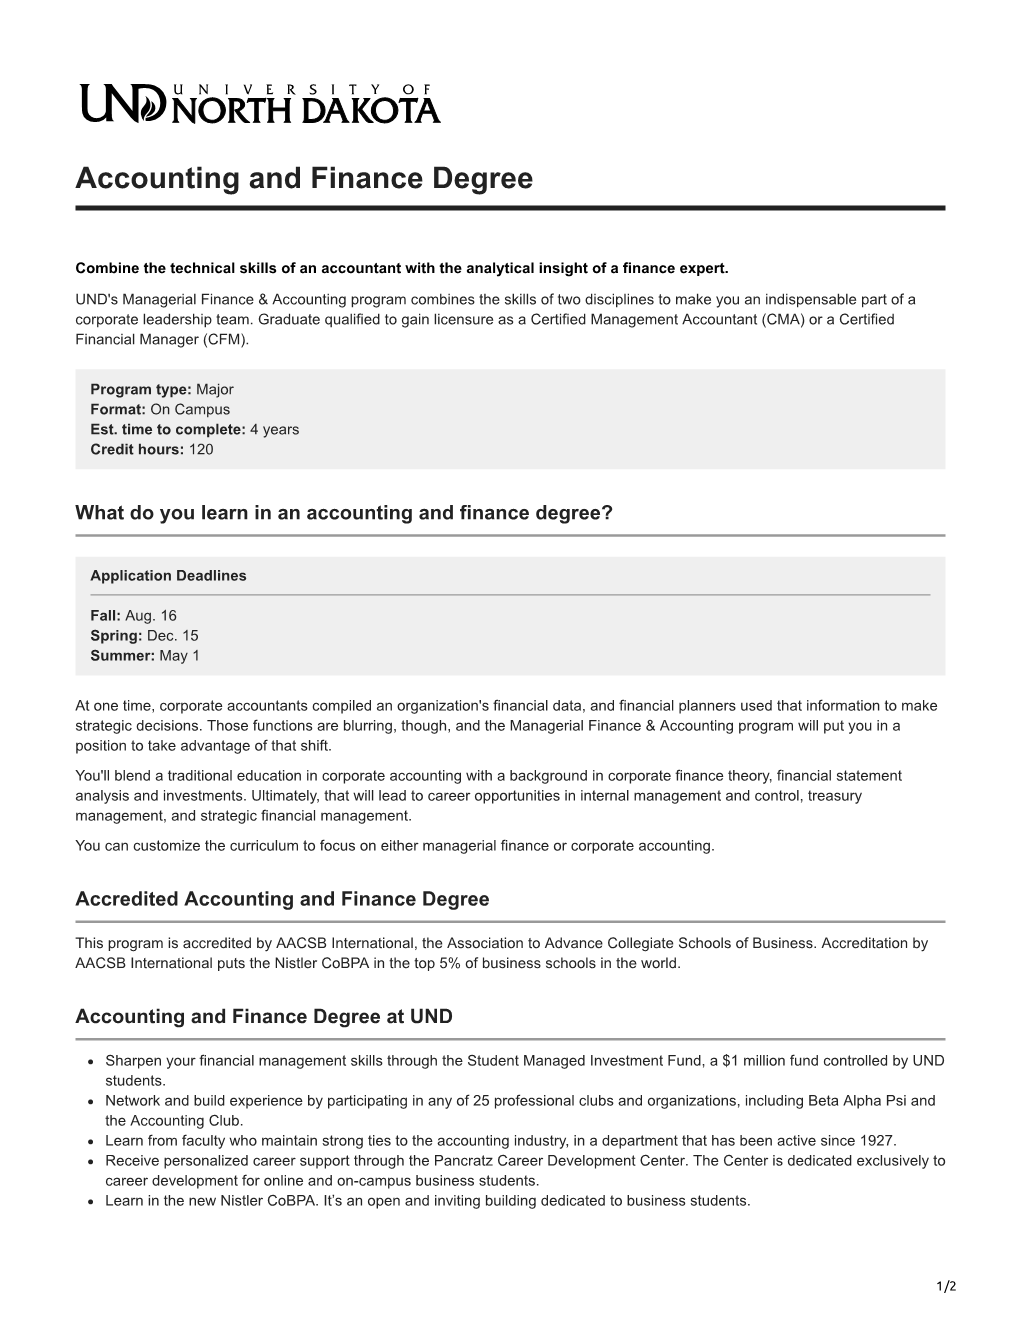 Managerial Finance & Accounting